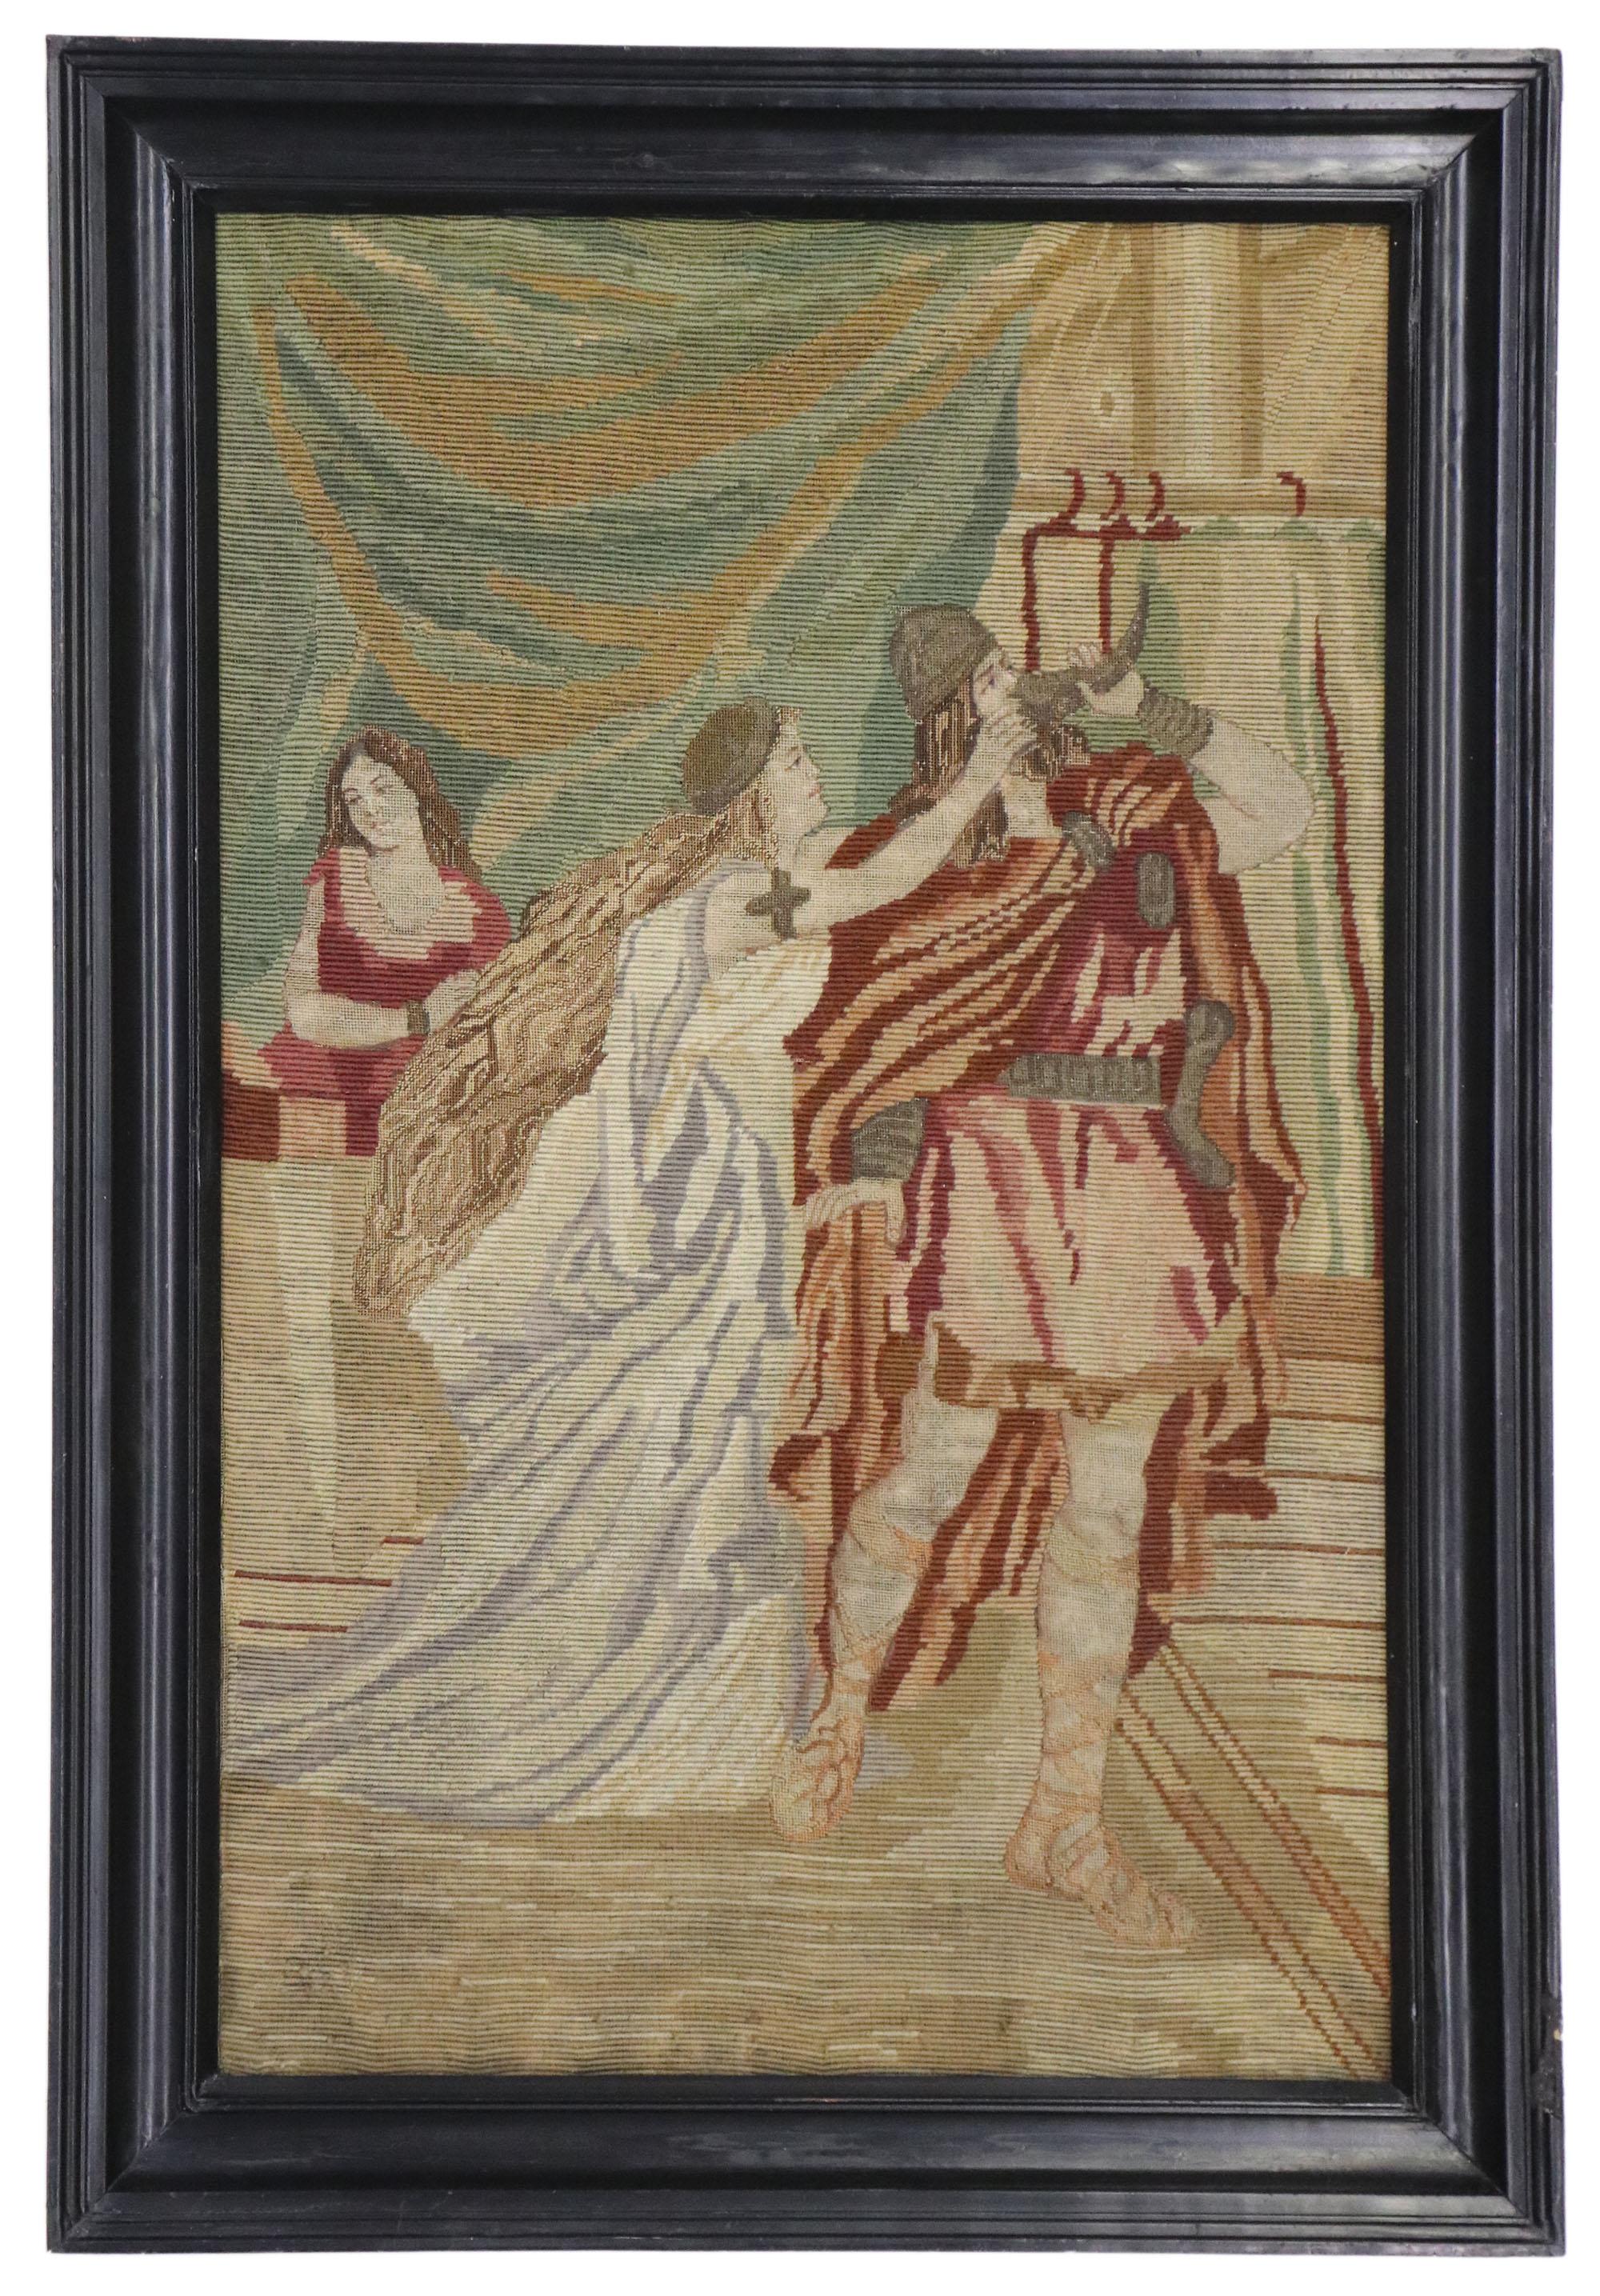 Antique English Needlepoint Tristan and Isolde Tapestry with Medieval Style For Sale 3